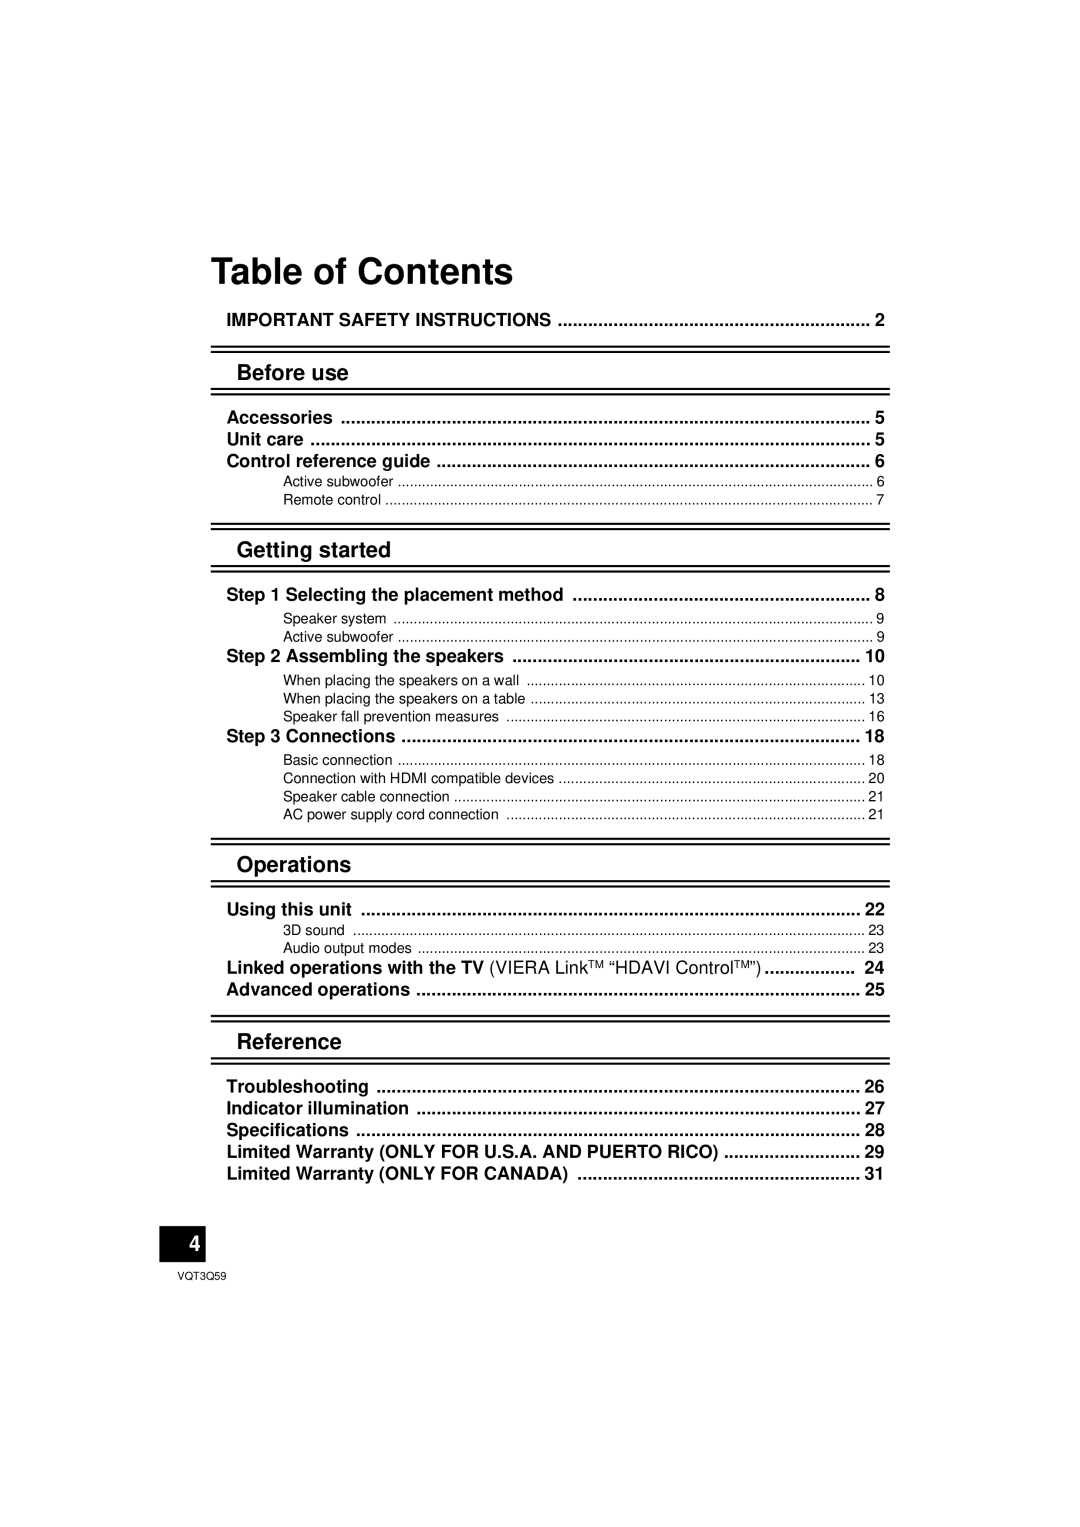 Panasonic SC-HTB15 owner manual Table of Contents, Before use, Getting started, Operations, Reference 